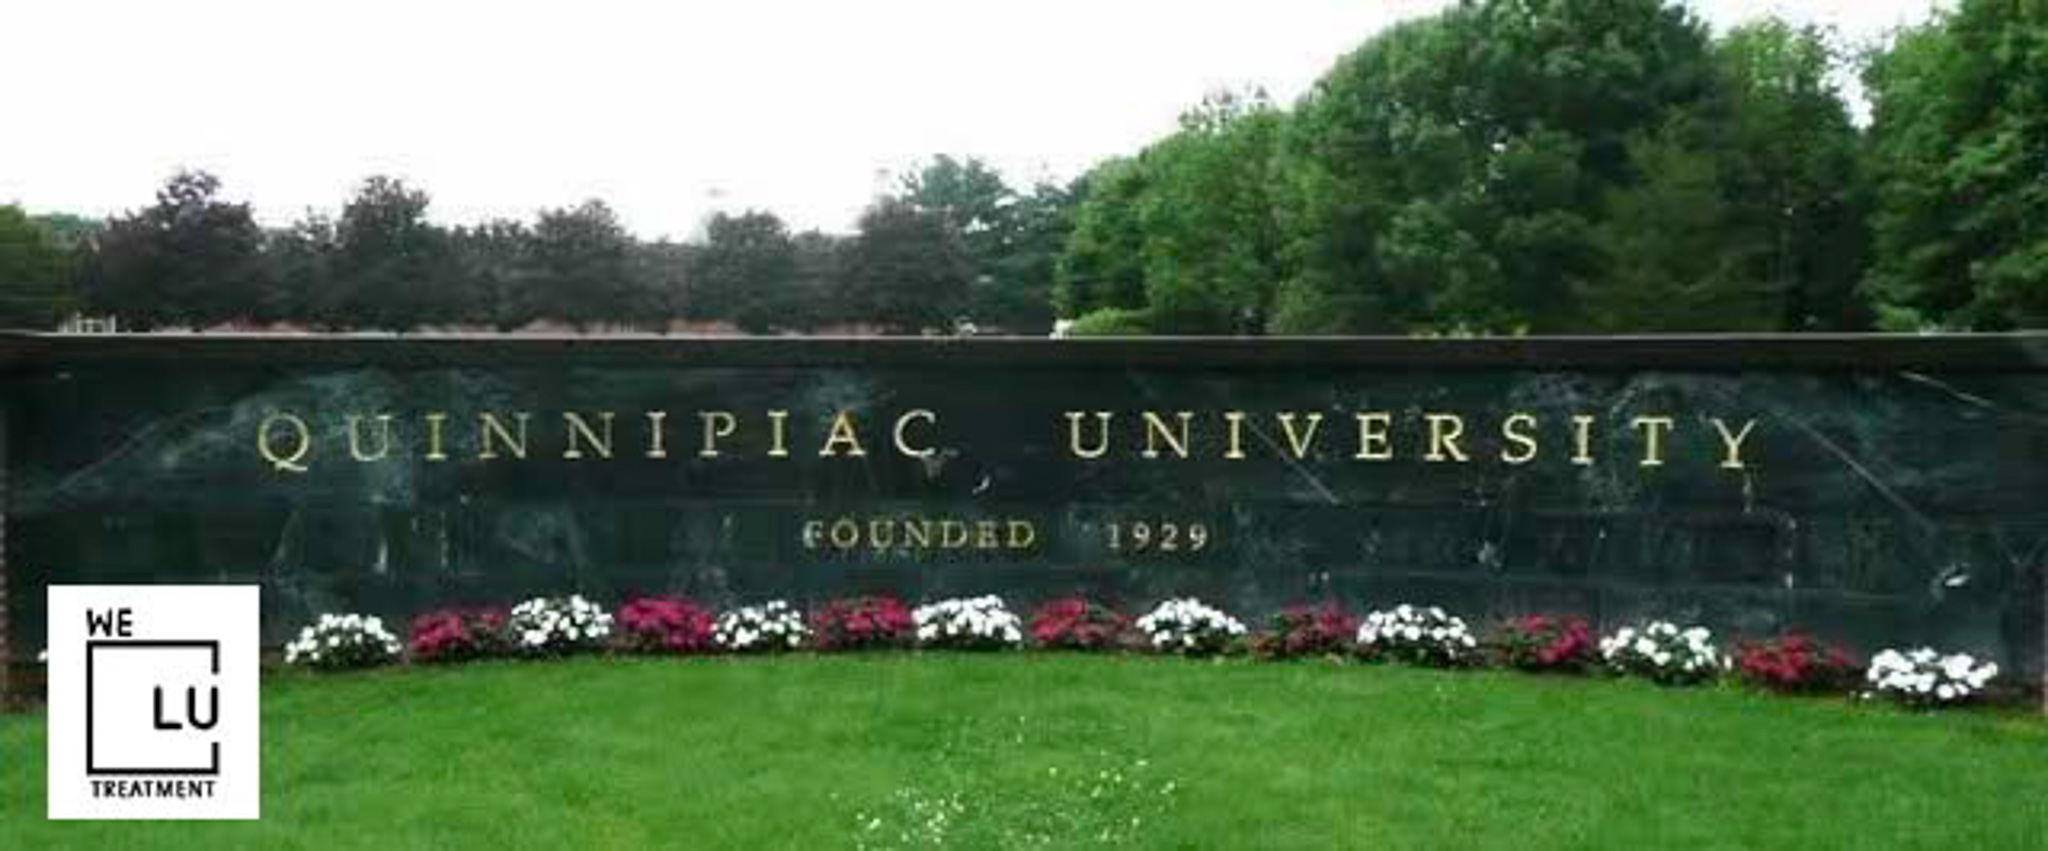 Quinnipiac CT We Level Up treatment center for drug and alcohol rehab detox and mental health services - Image 1